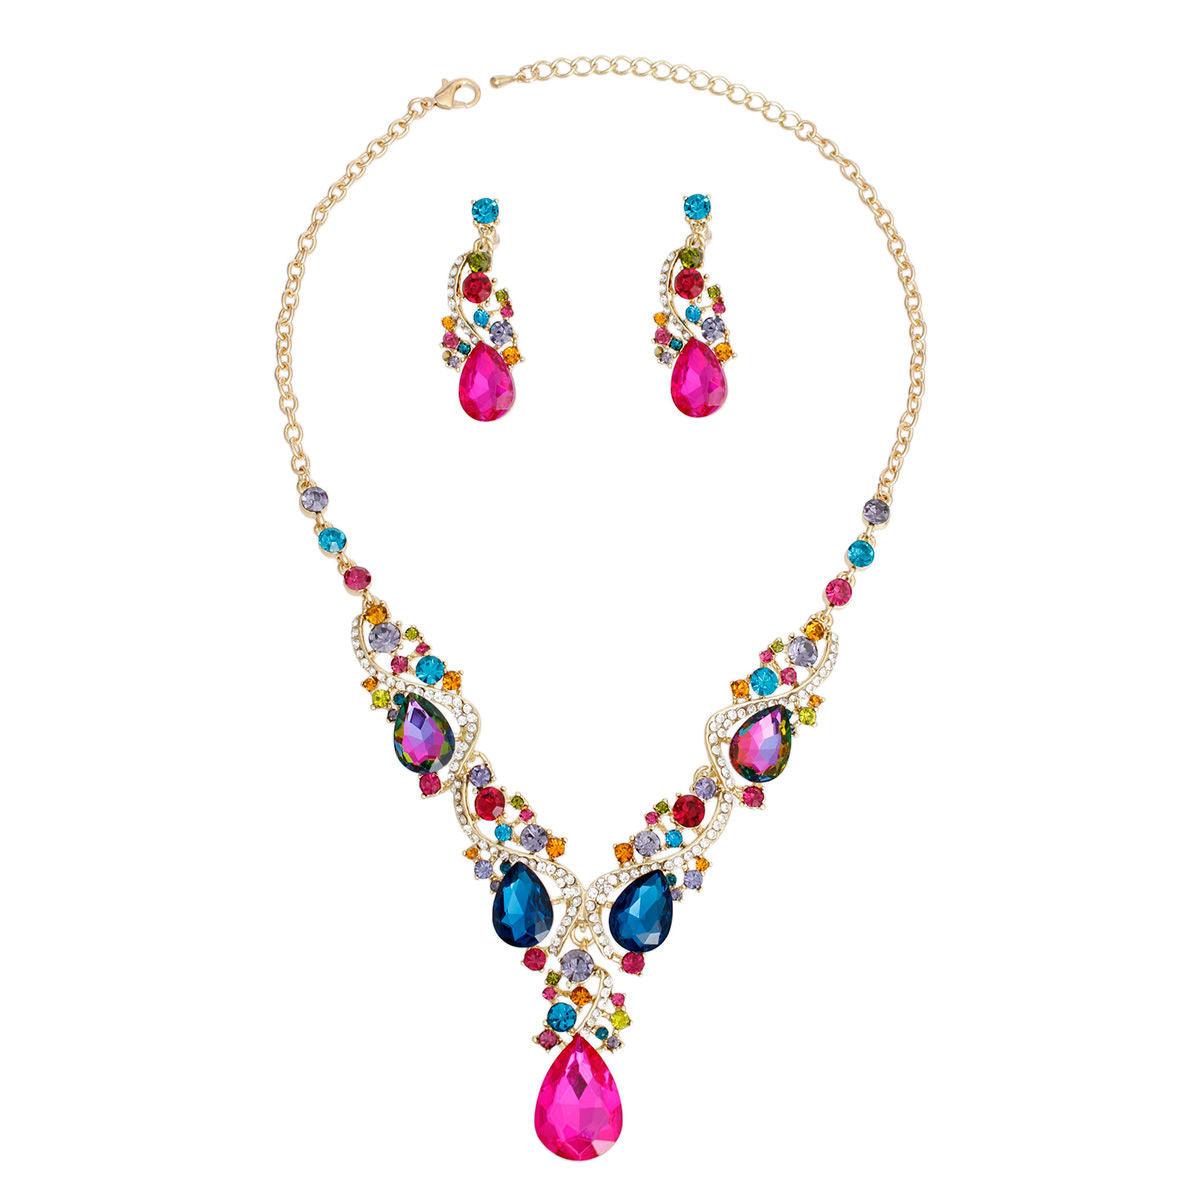 Dazzling Colorful Waterfall Necklace & Drop Earrings: Stun with Sparkle!